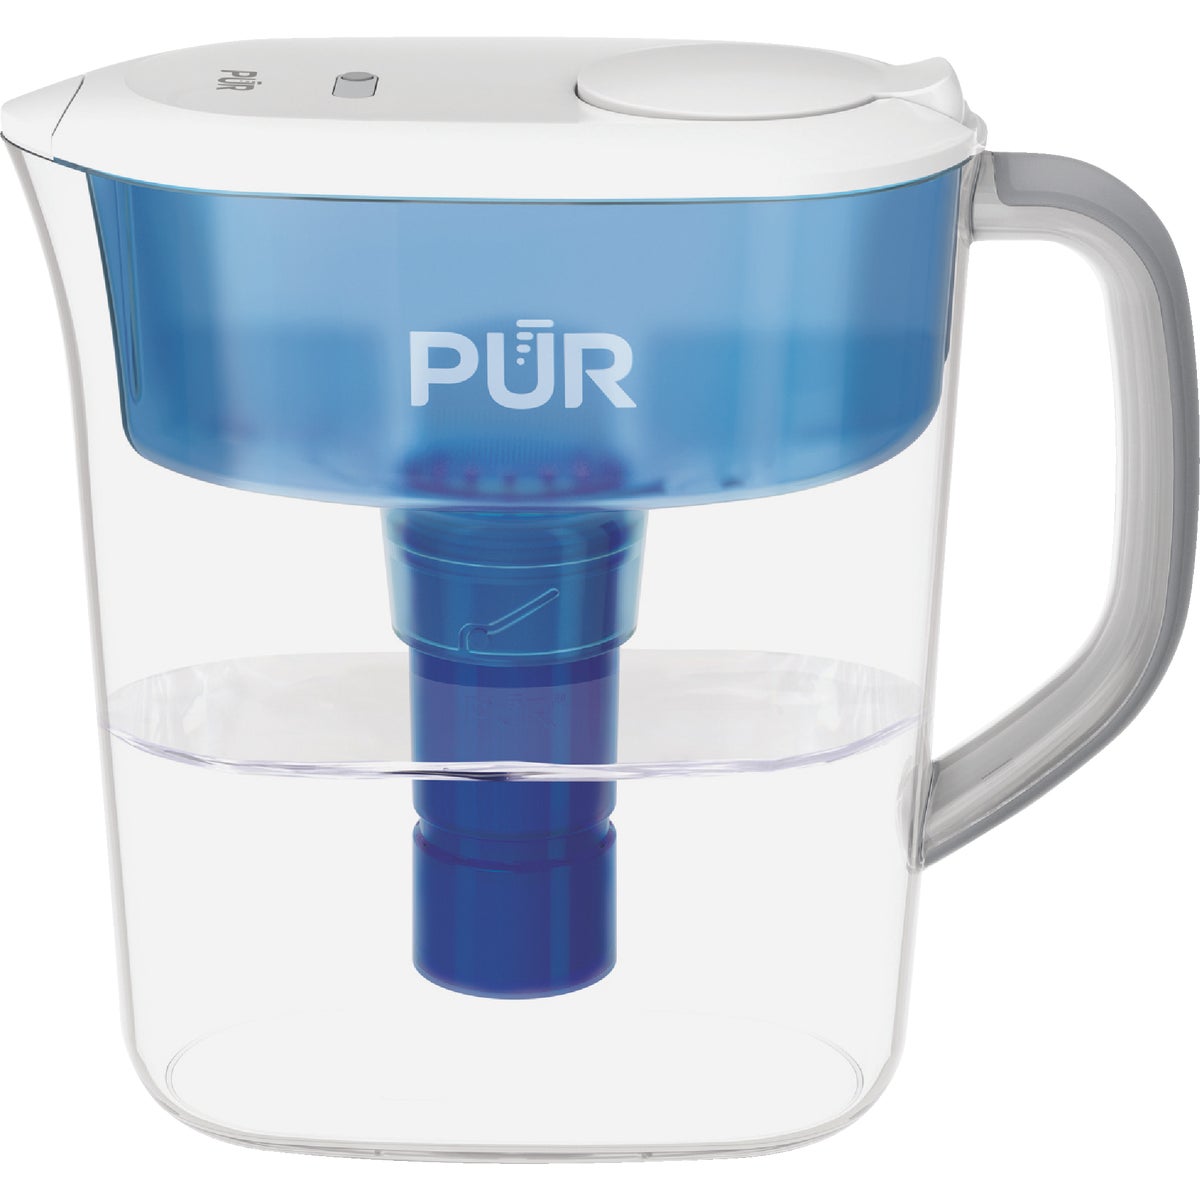 PUR PLUS 11 Cup Water Filter Pitcher, White